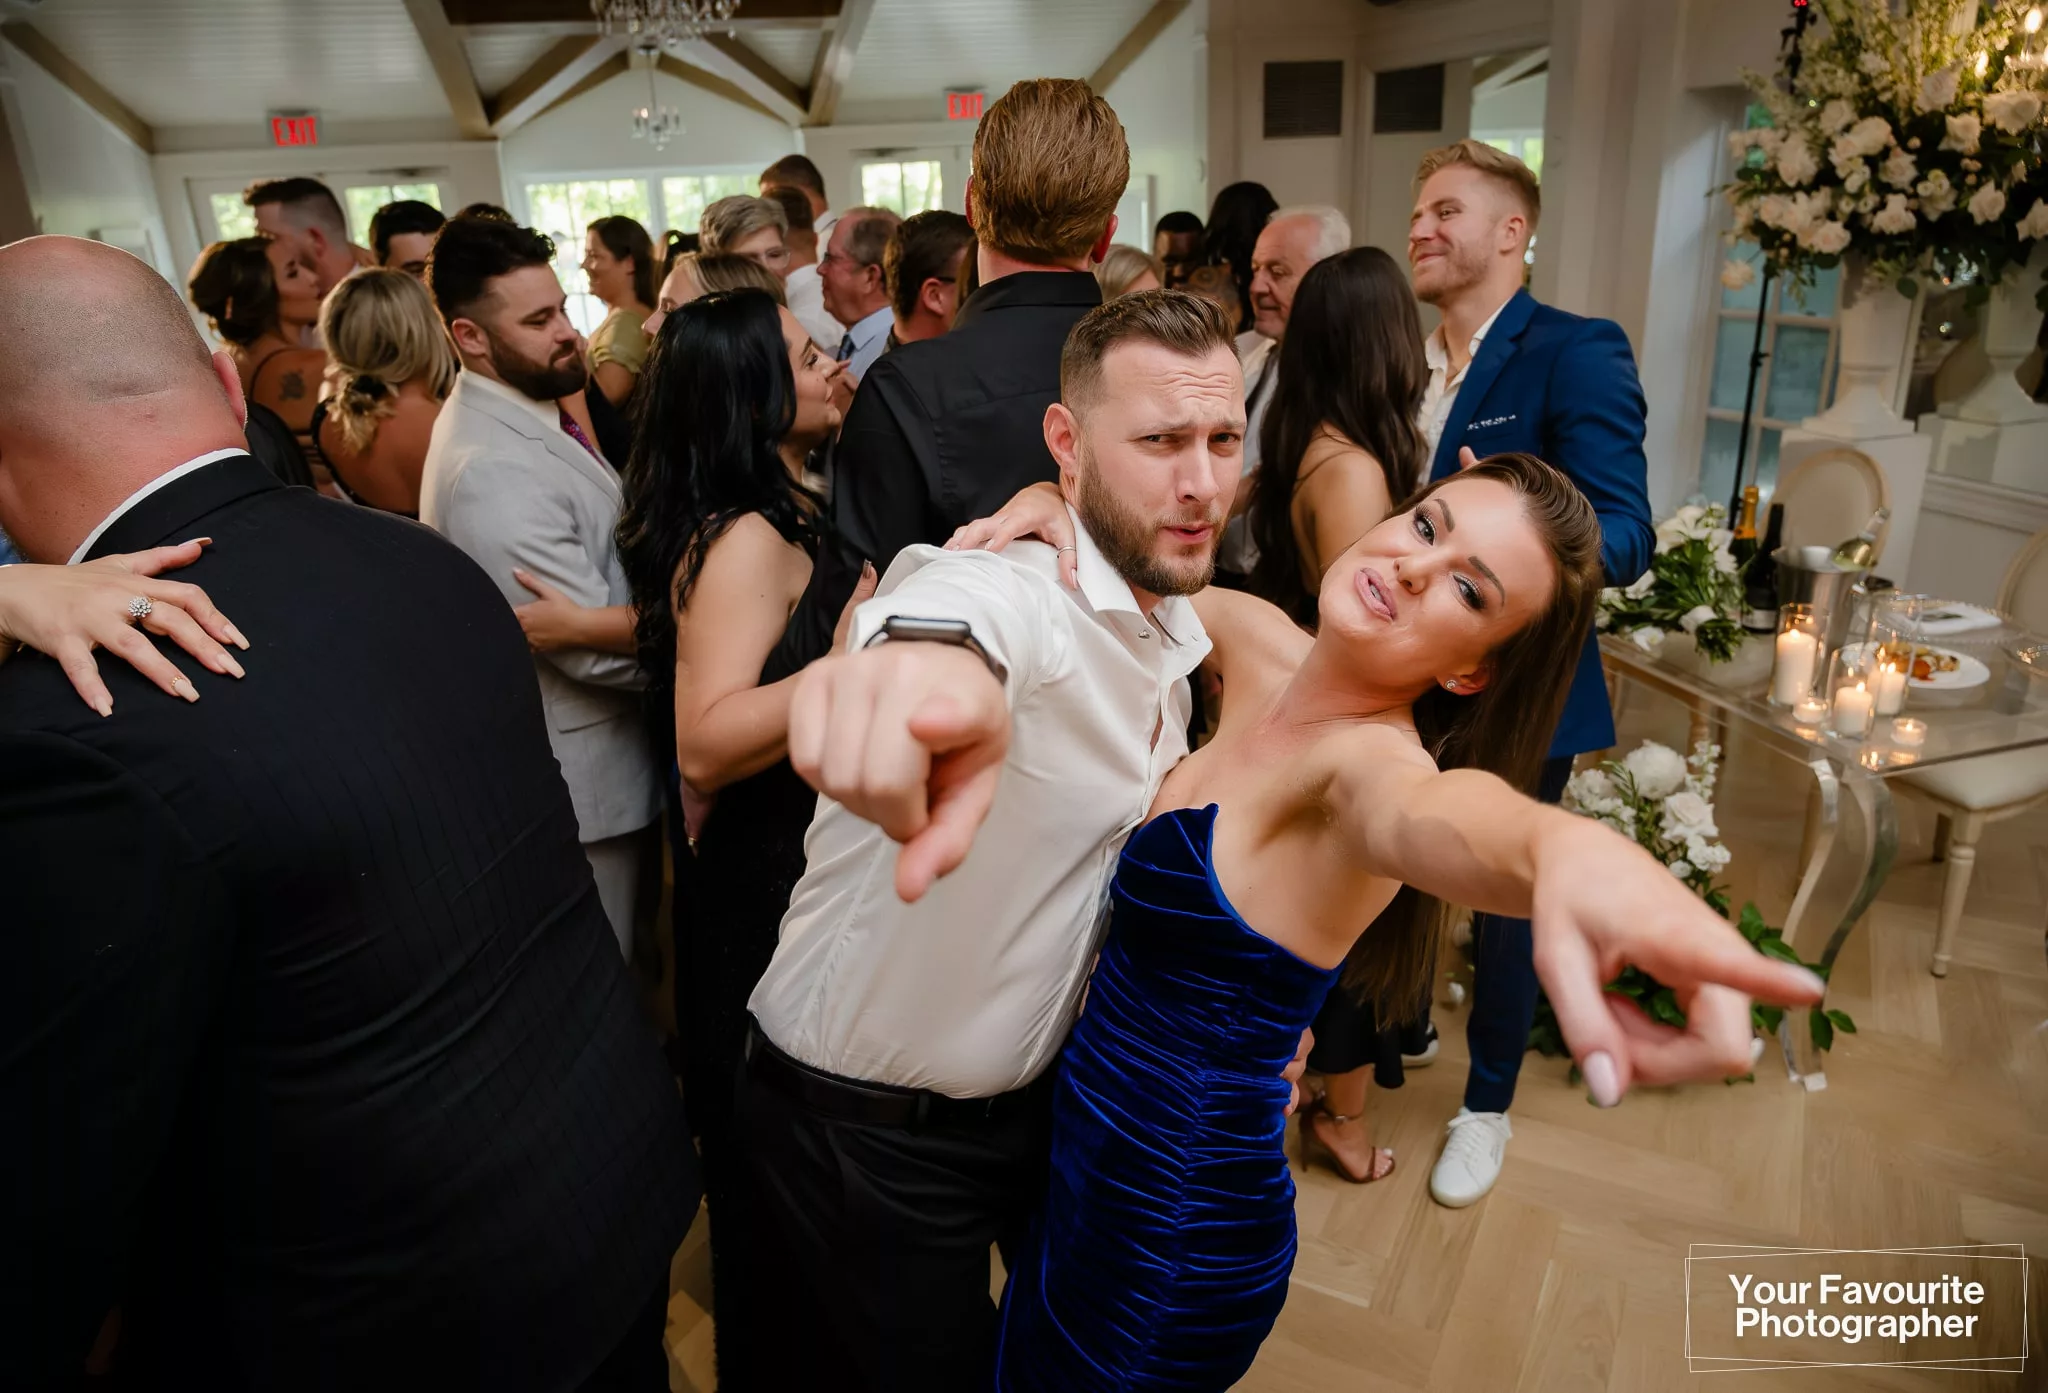 Wedding guests point at the camera while on the dance floor